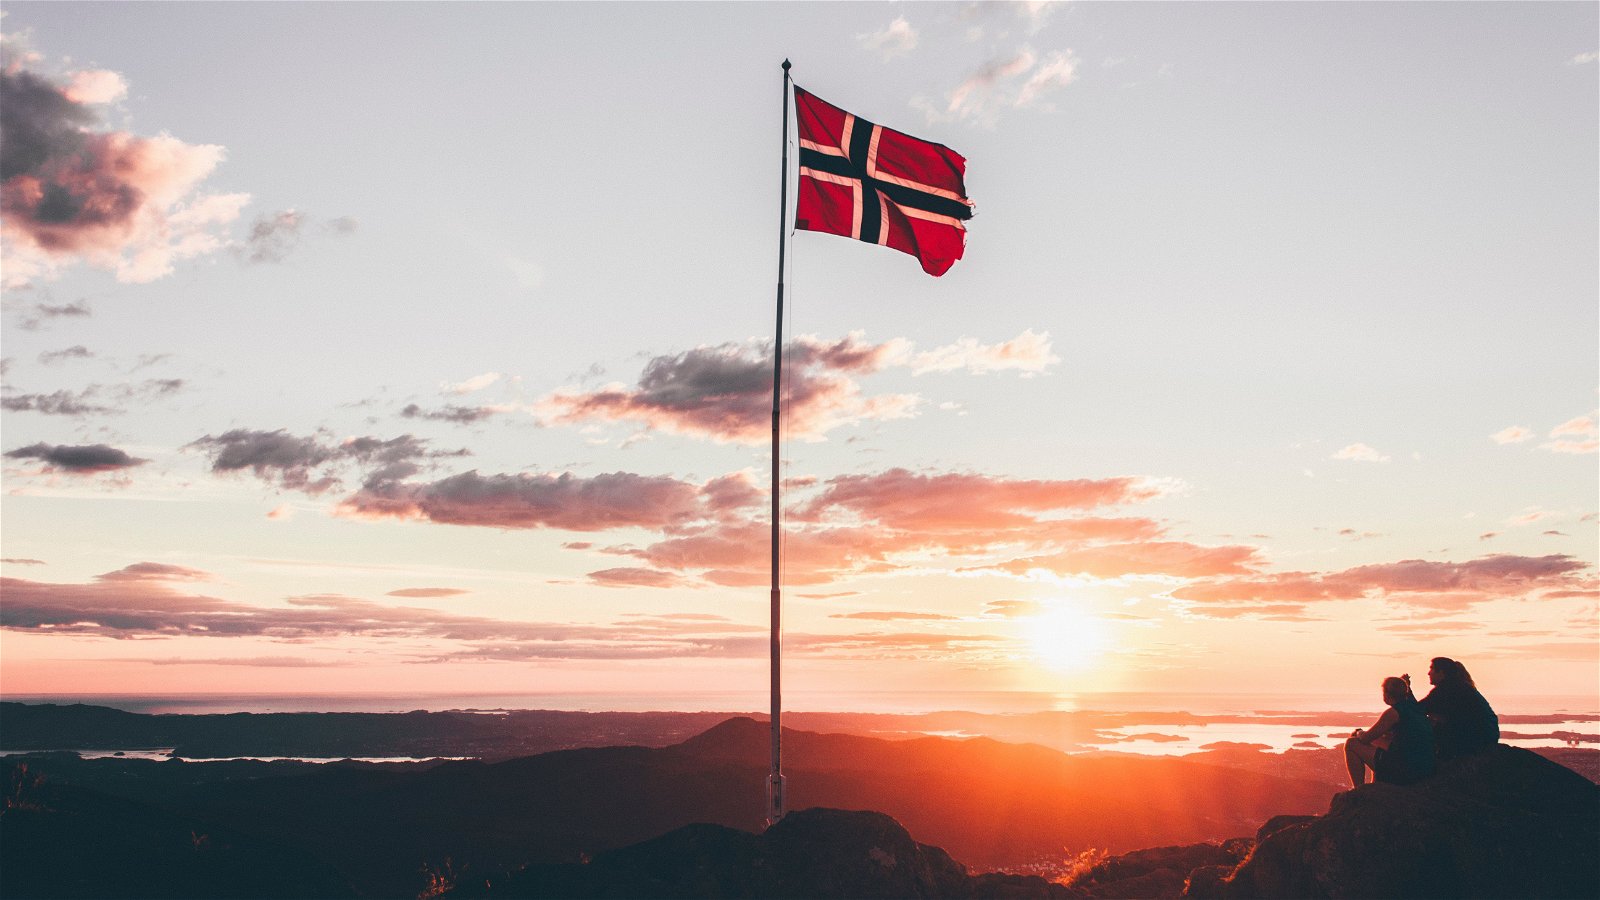 The transition of Norway’s fossil fuel practices to a cost-efficient greener model 